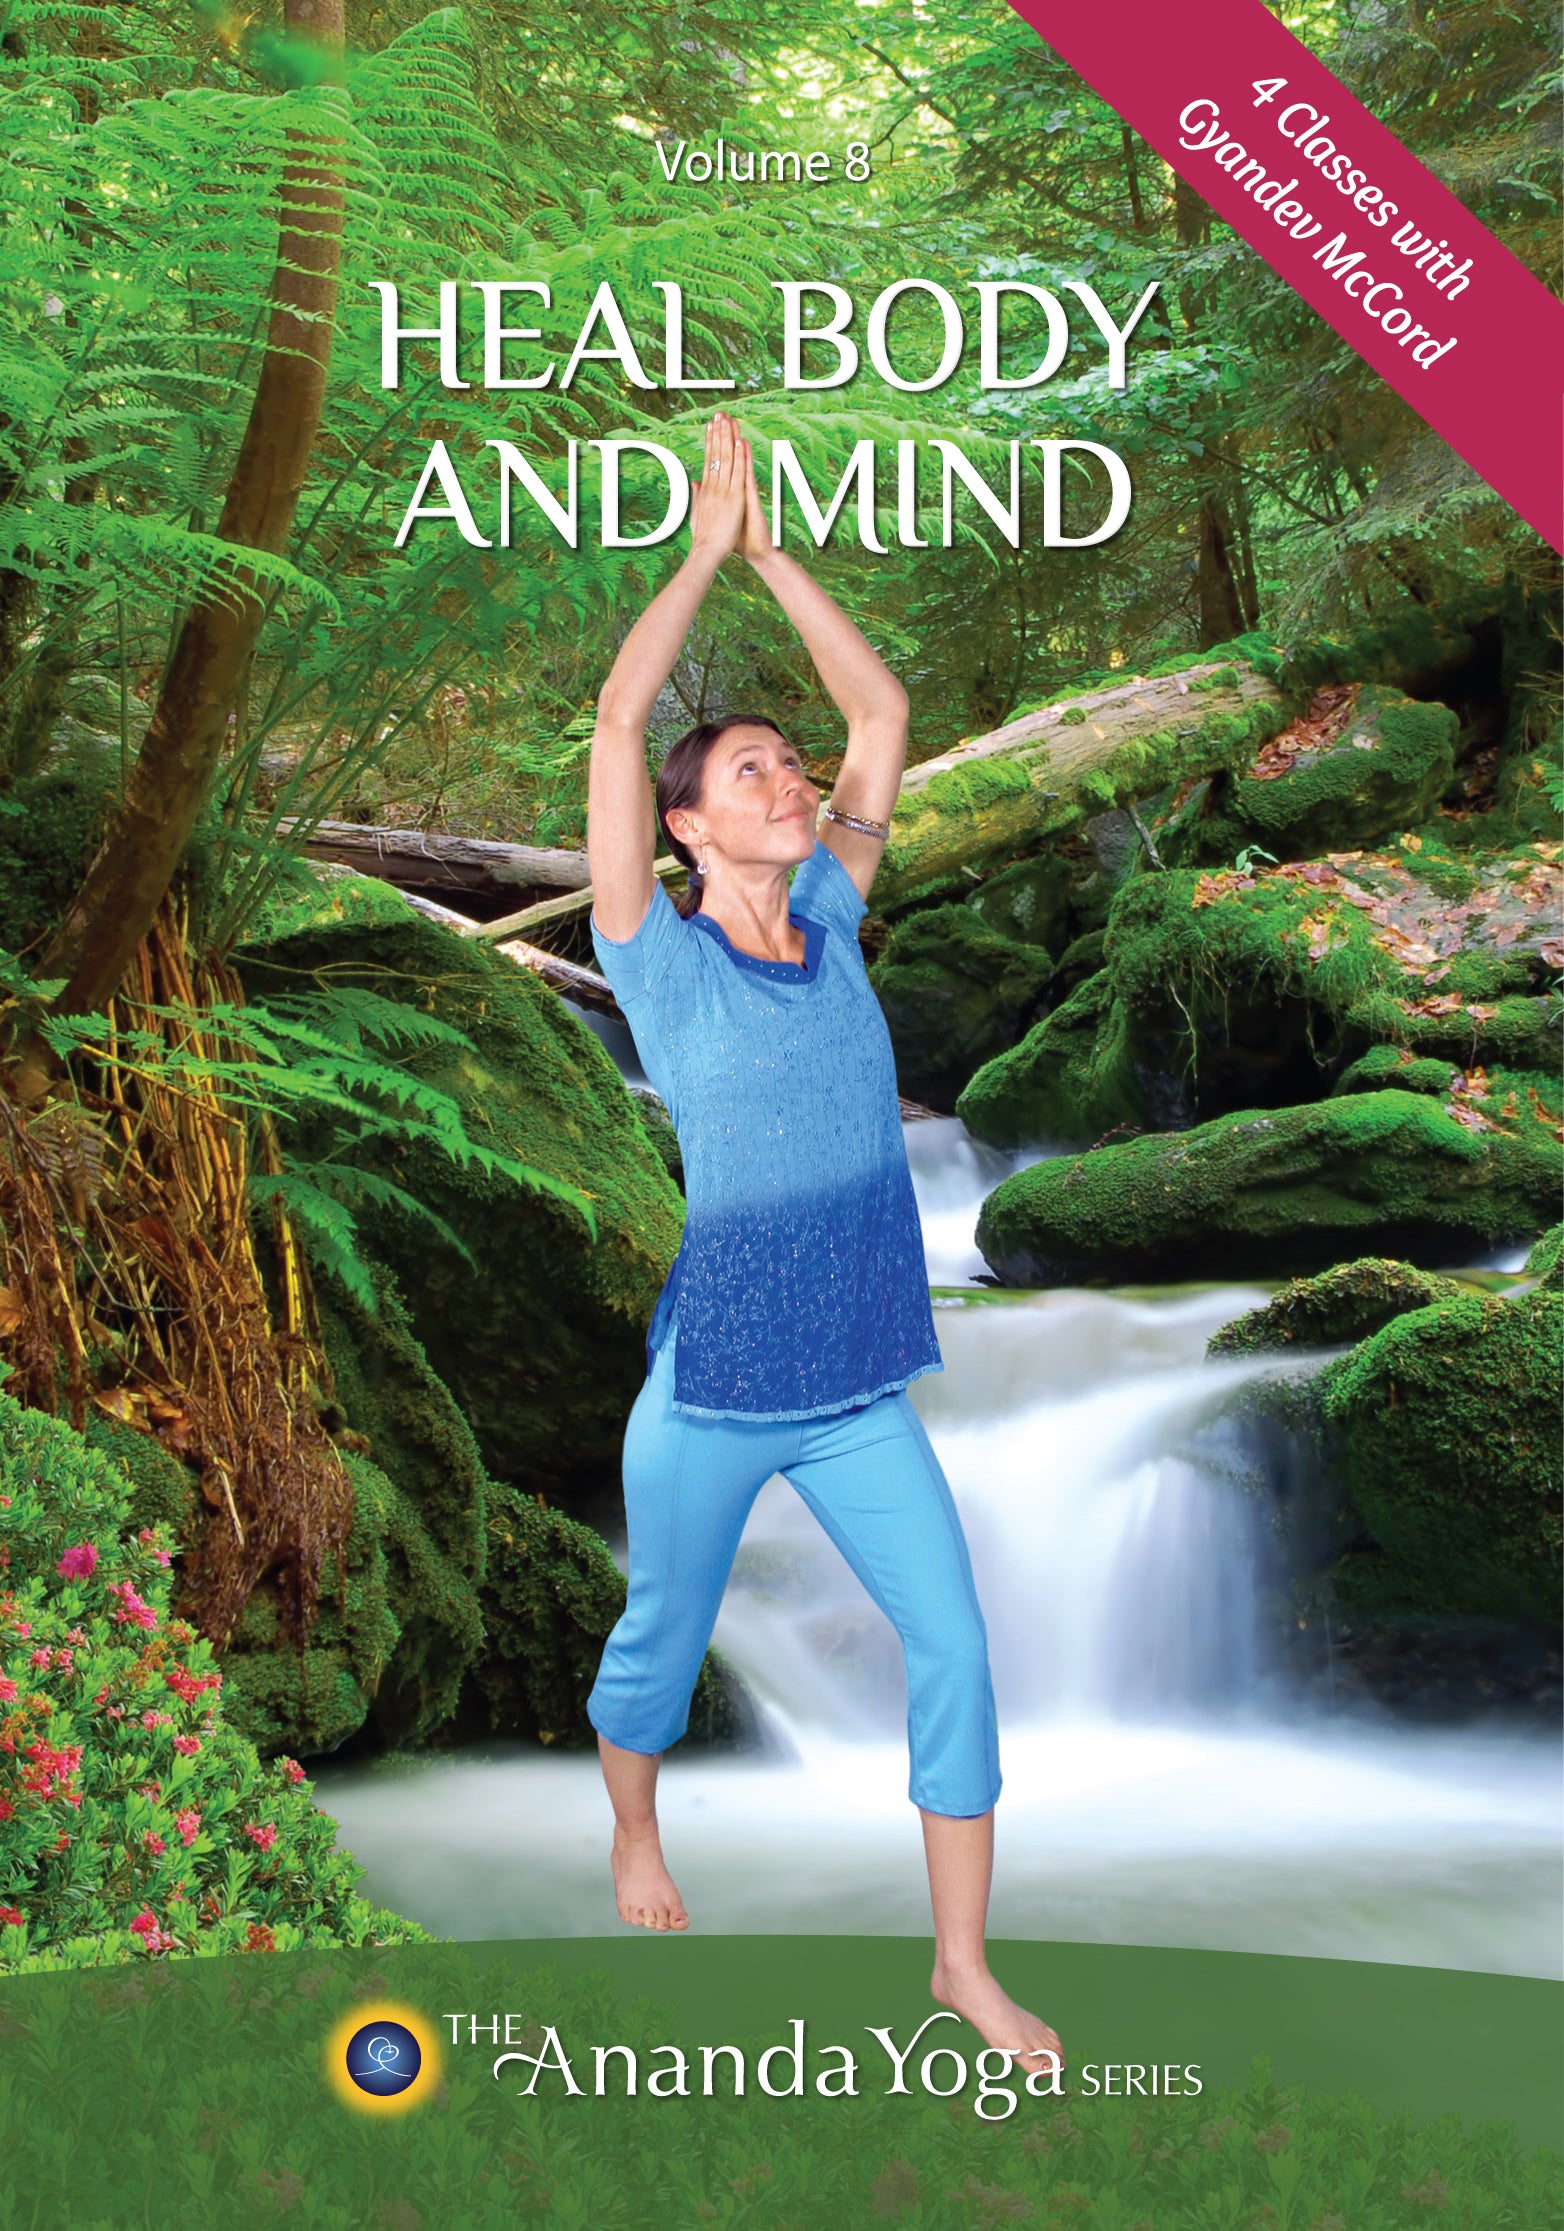 Heal Body and Mind - Volume 8 DVD